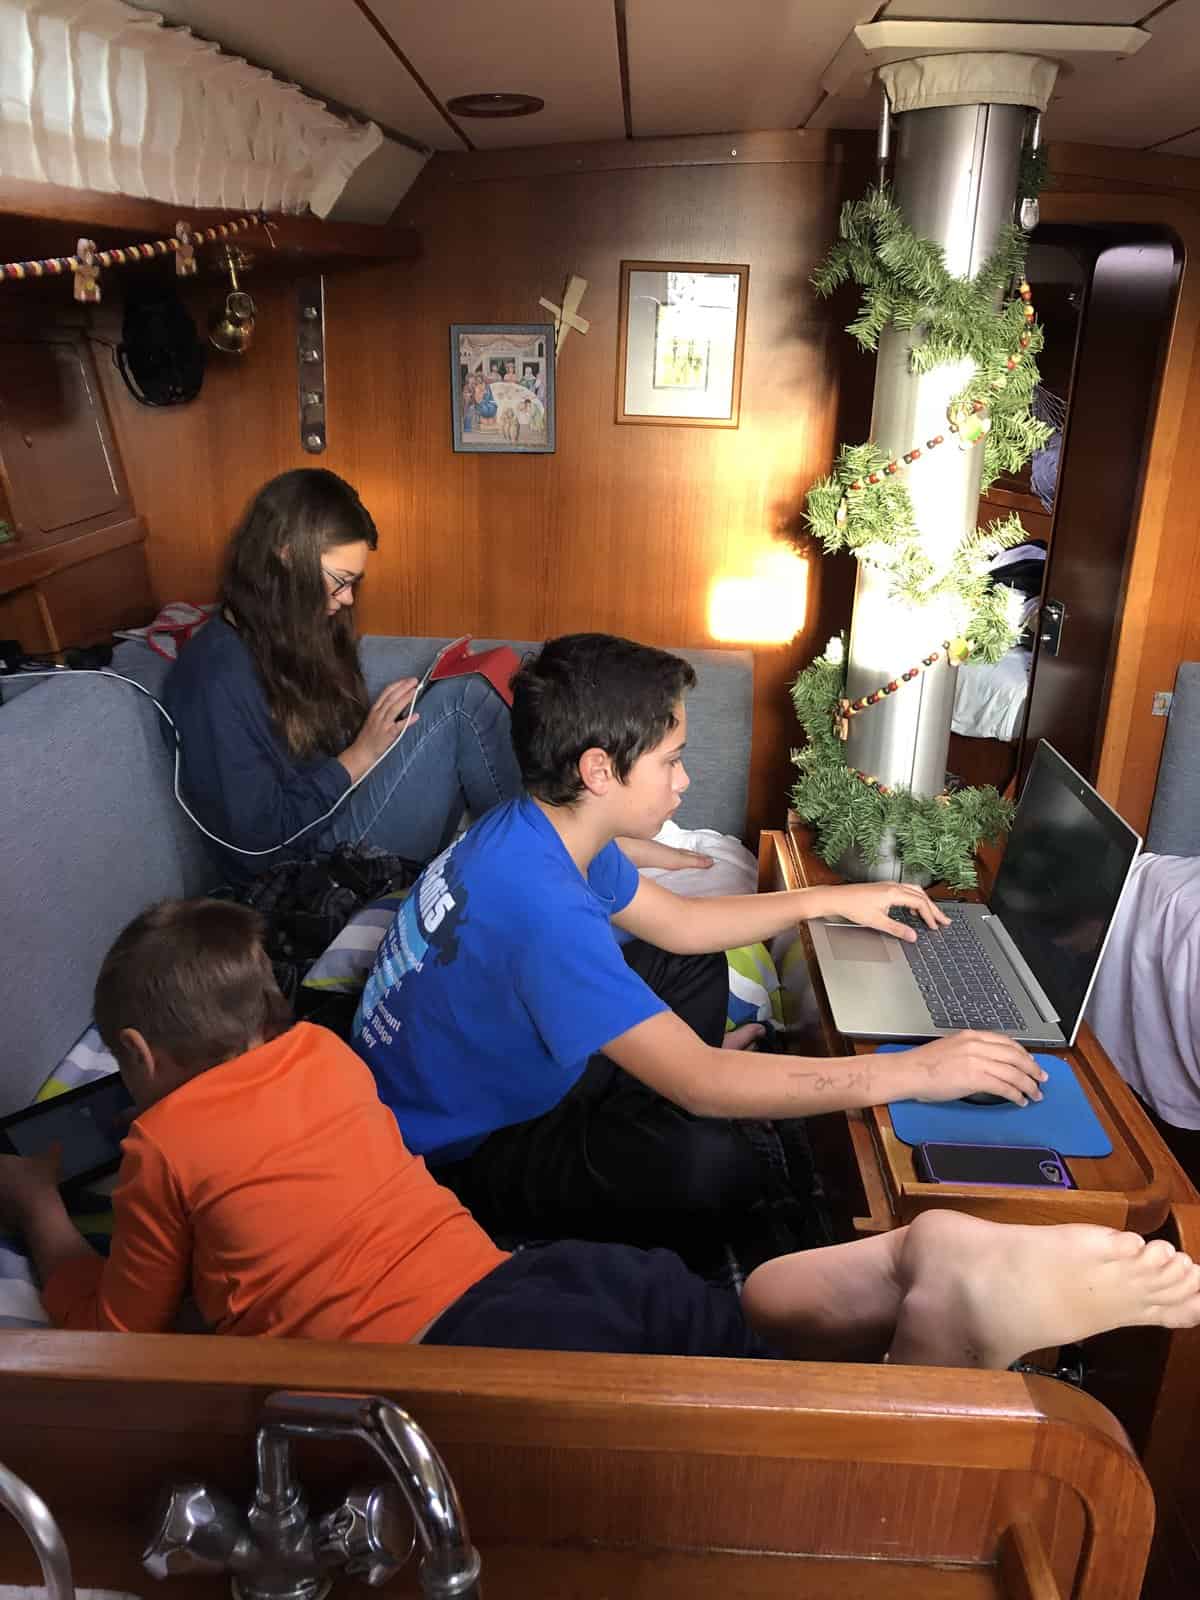 kids on their devices, sharing a room, on a boat